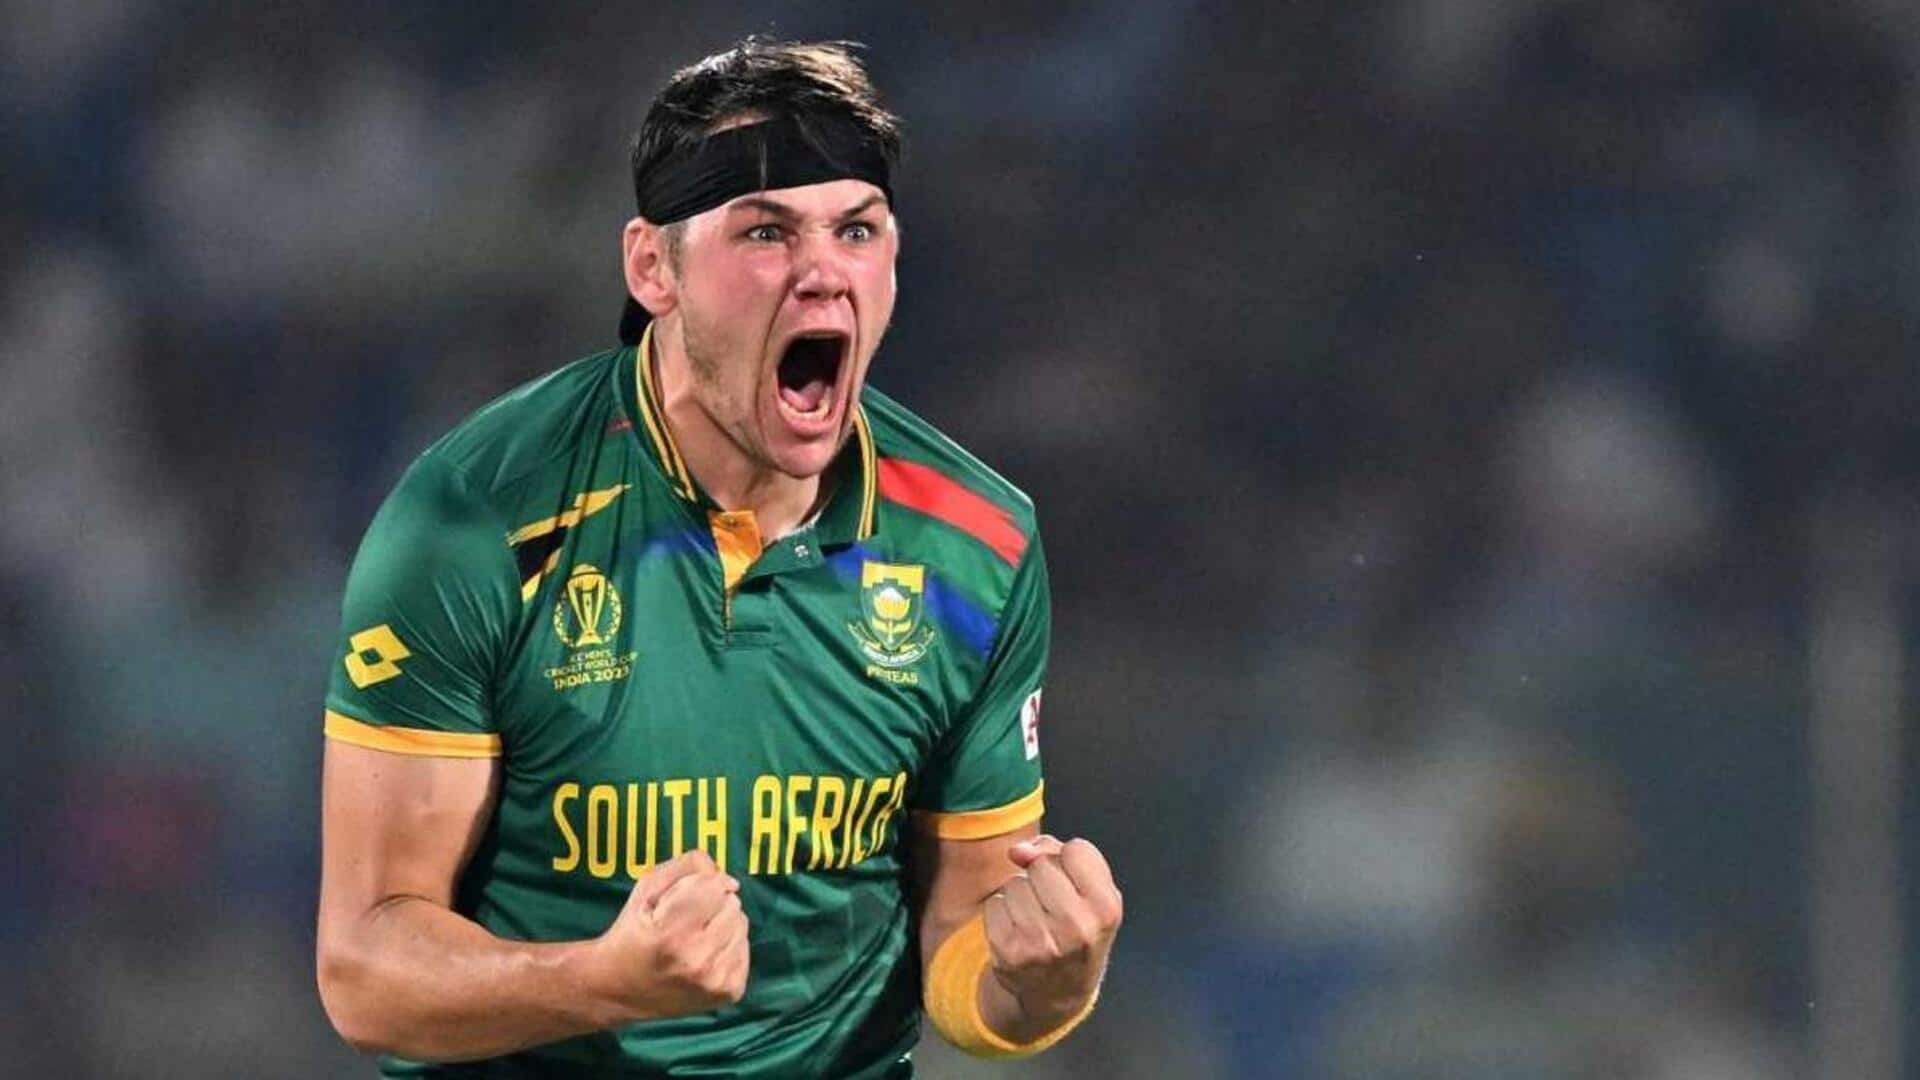 ICC World Cup, Gerald Coetzee claims 3/35 against England: Stats